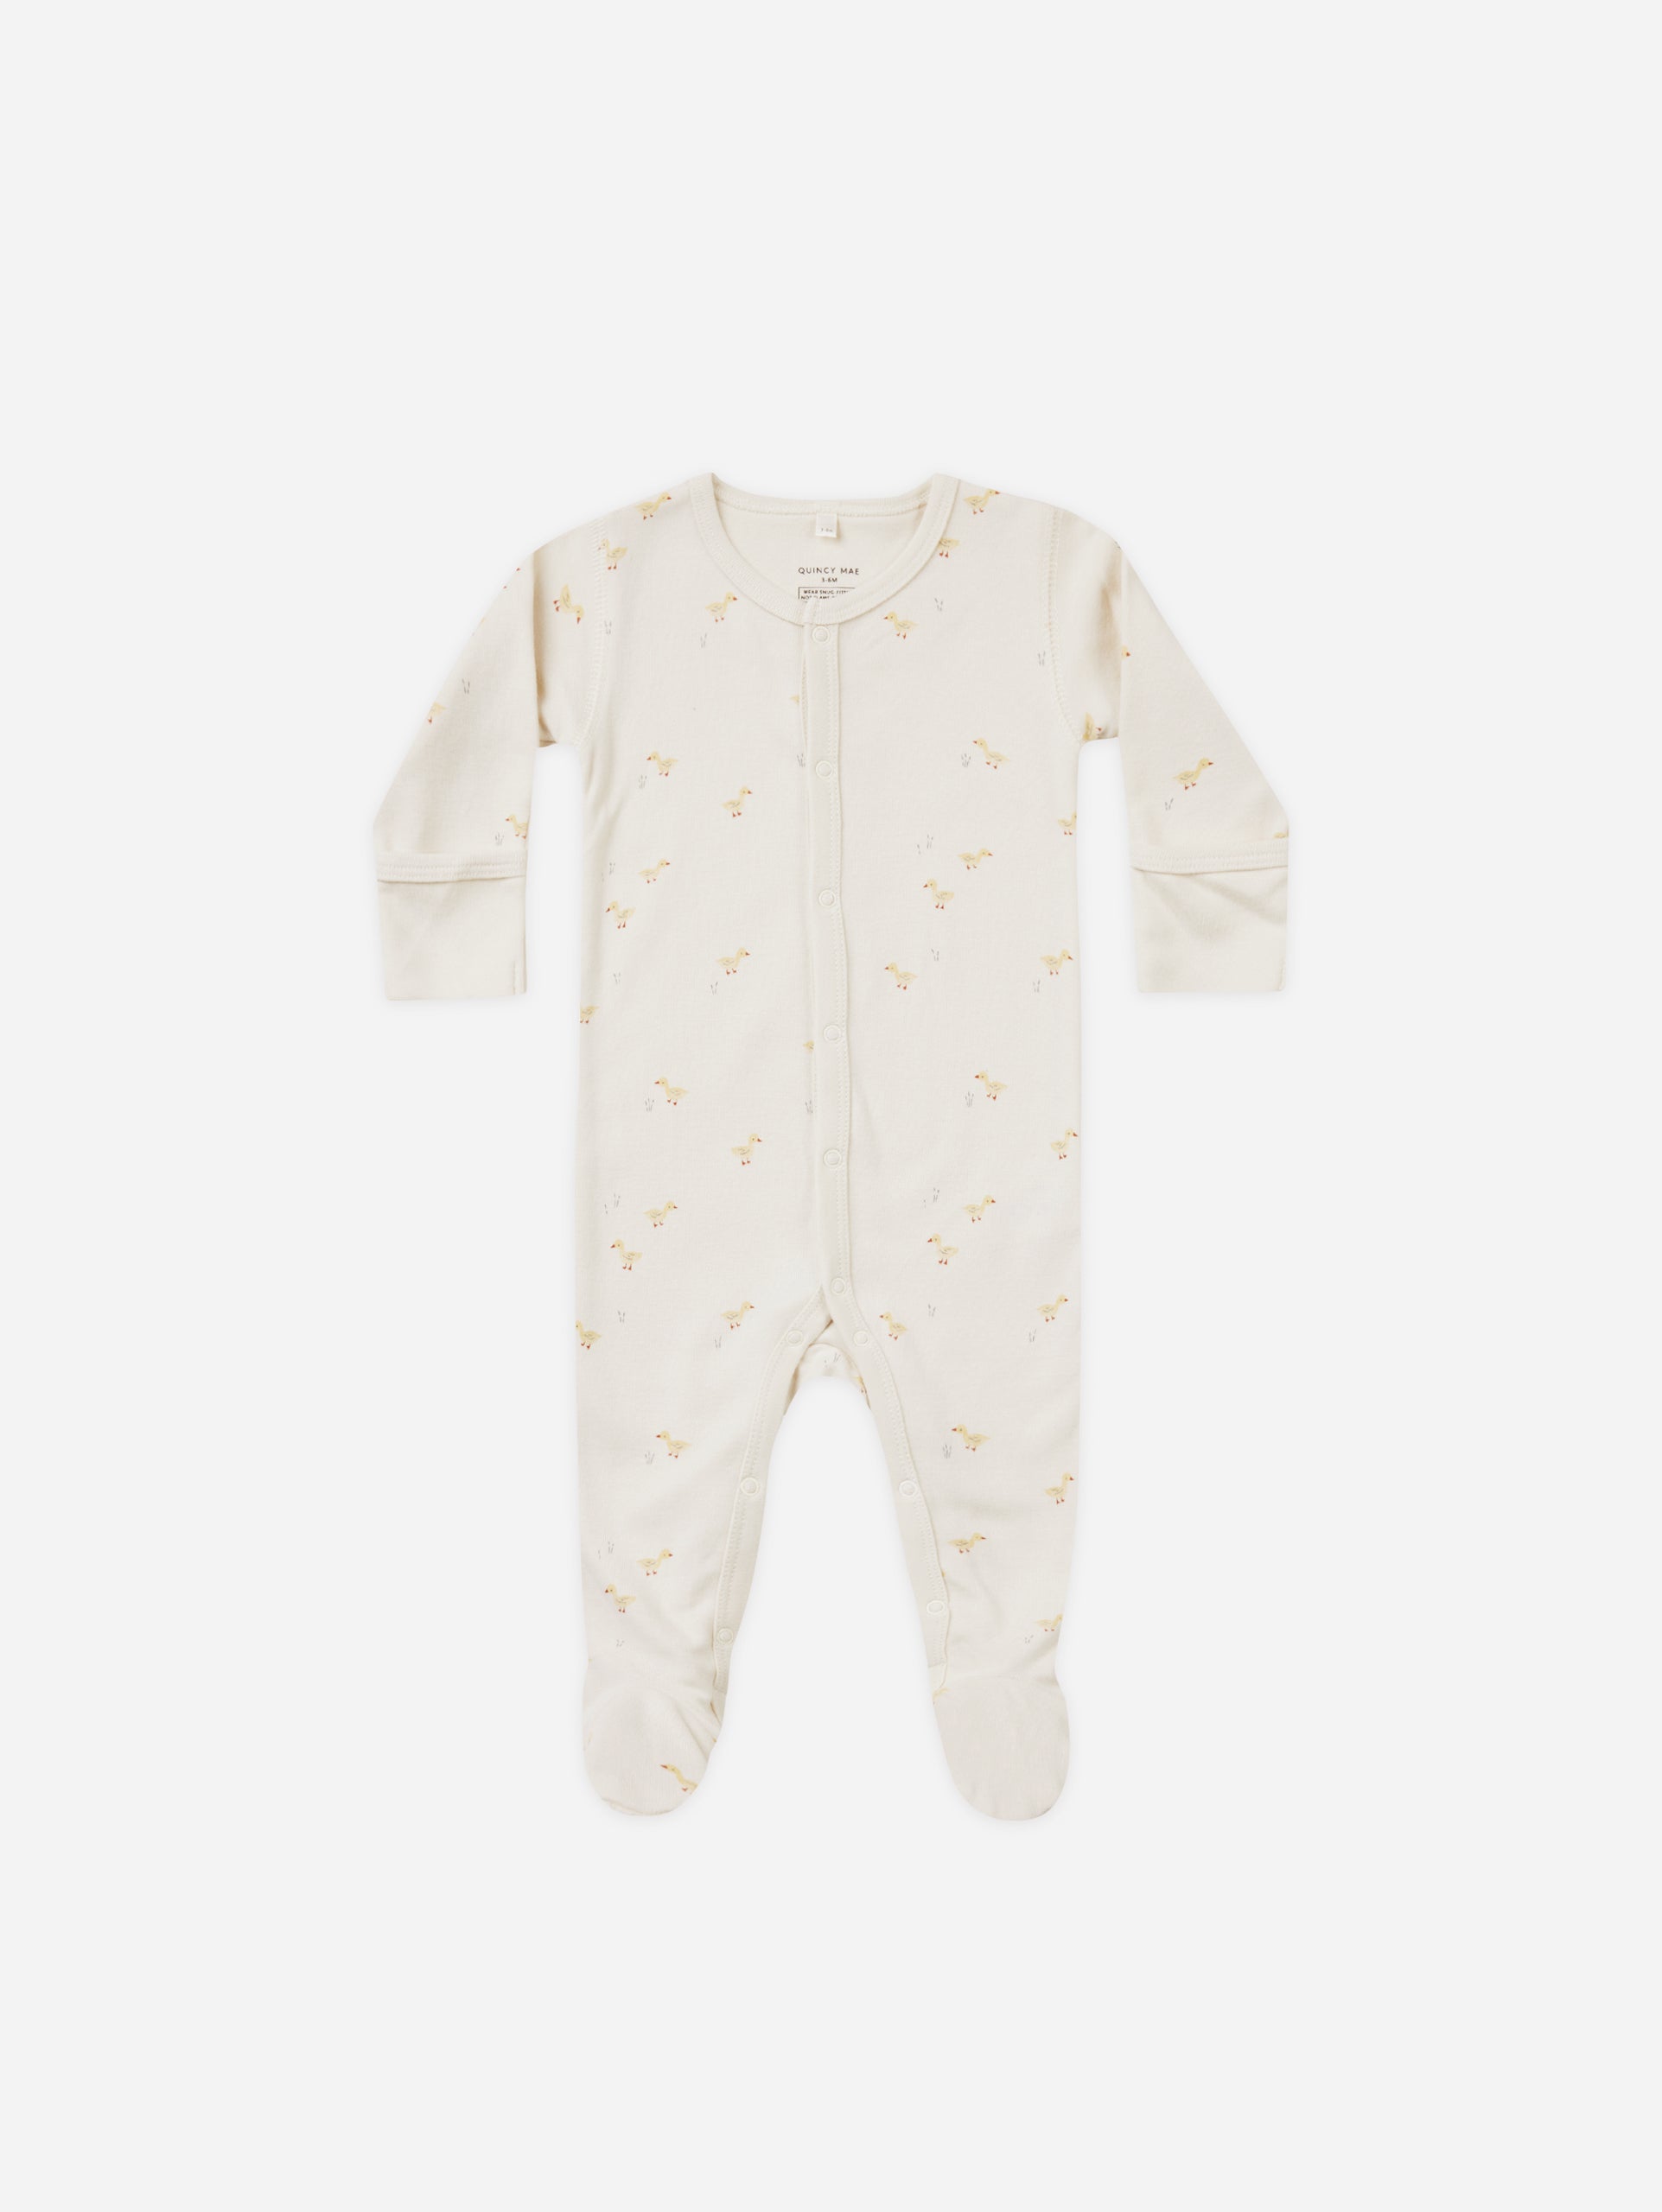 Full Snap Footie || Ducks - Rylee + Cru | Kids Clothes | Trendy Baby Clothes | Modern Infant Outfits |